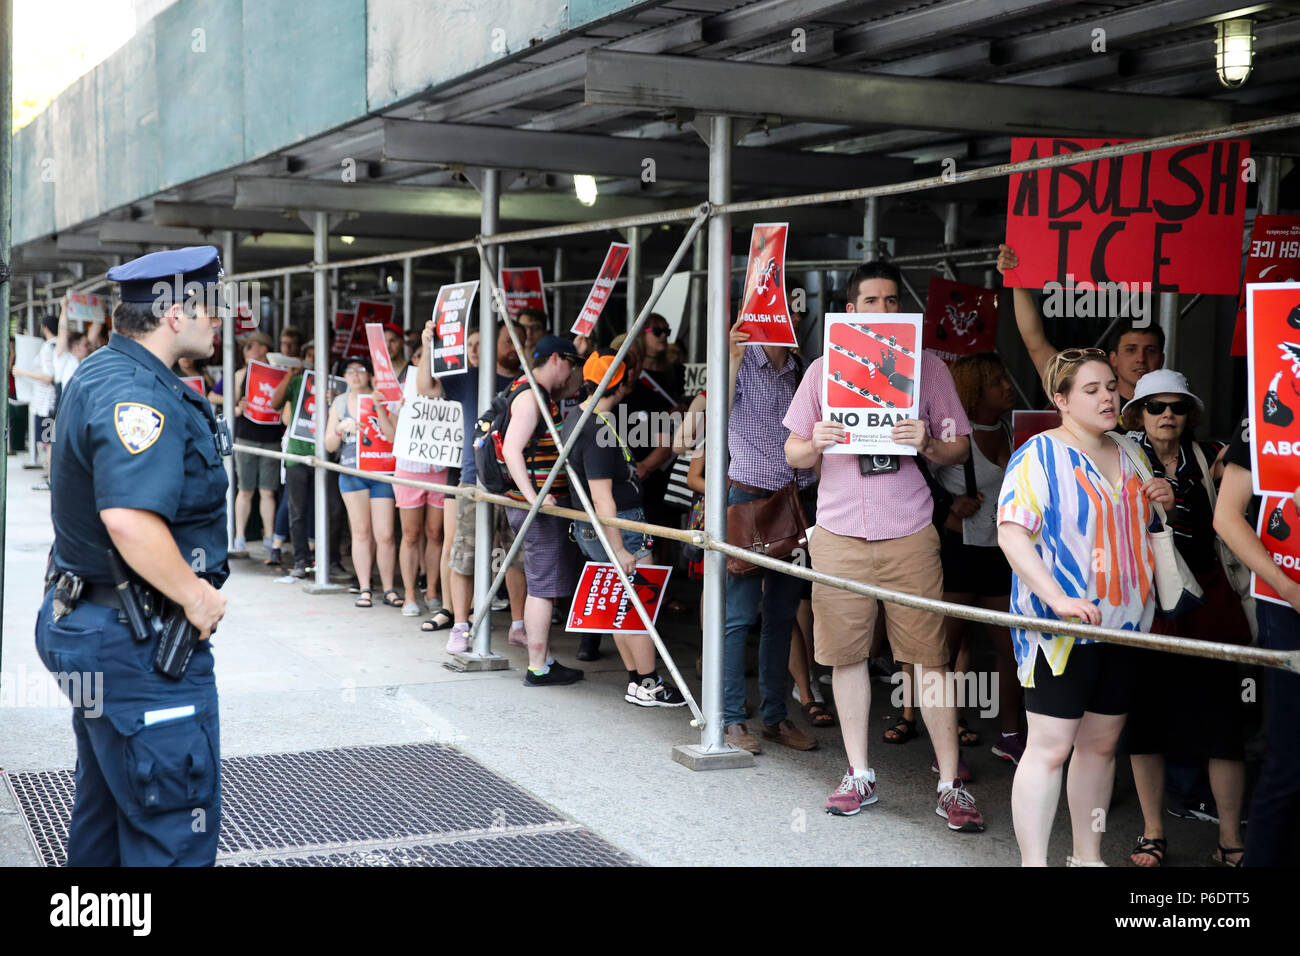 New York, USA. 29th June, 2018. People take part in the 'March to Abolish ICE' protest in New York, the United States, June 29, 2018. Hundreds of people took part in the march on Friday, calling for the complete abolition of Immigration and Customs Enforcement (ICE) and an end to mass incarceration to illegal immigrants. Credit: Wang Ying/Xinhua/Alamy Live News Stock Photo